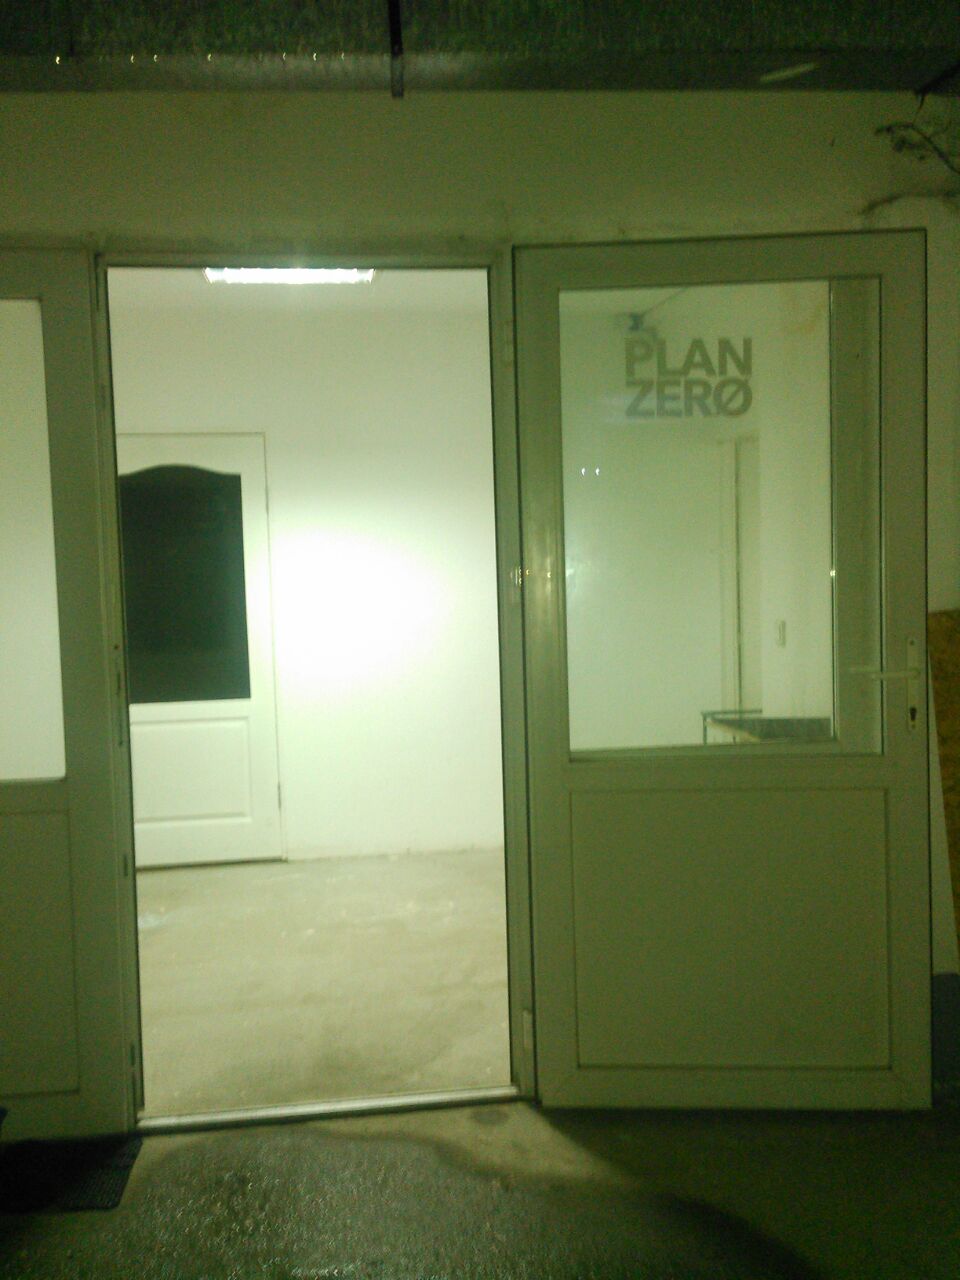 Entry to the Plan Zero hackerspace